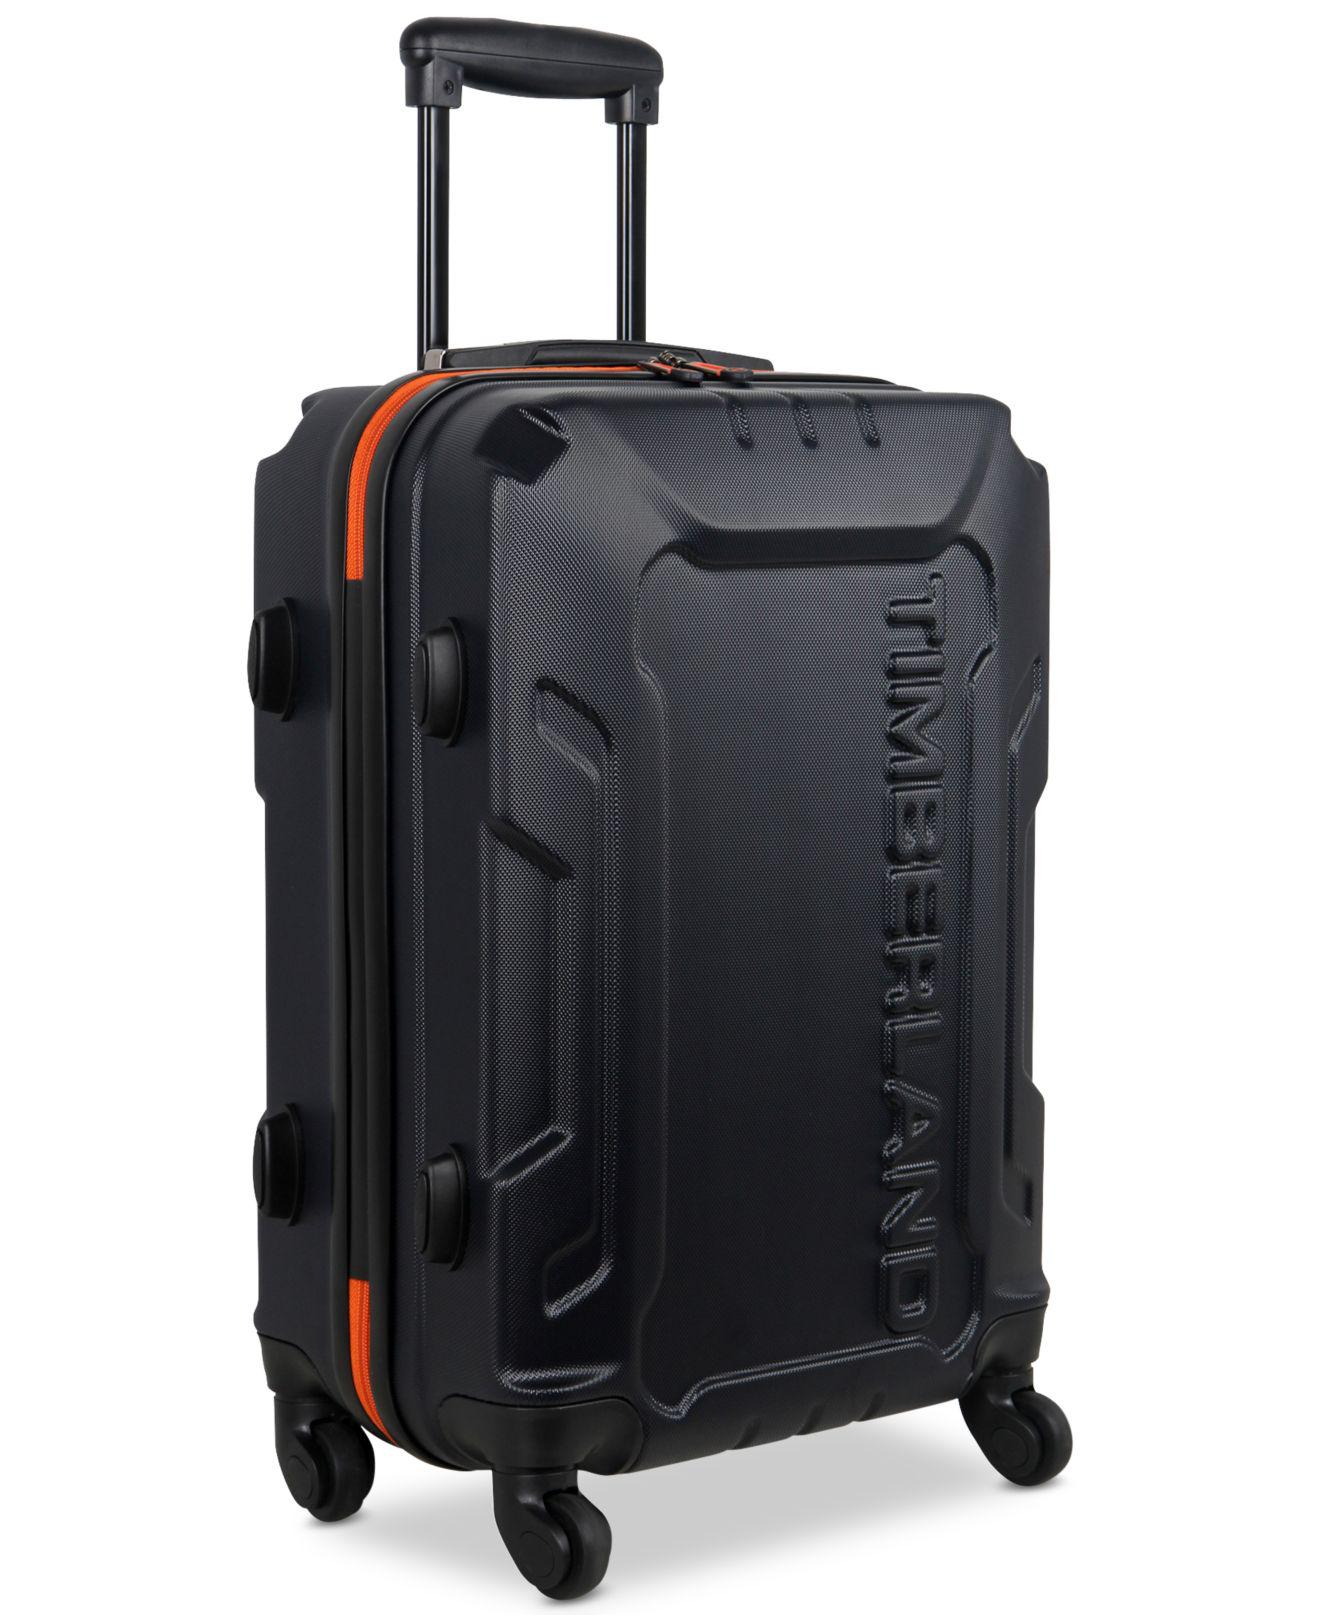 Timberland Hardside Spinner Luggage Clearance, SAVE 44% -  loutzenhiserfuneralhomes.com